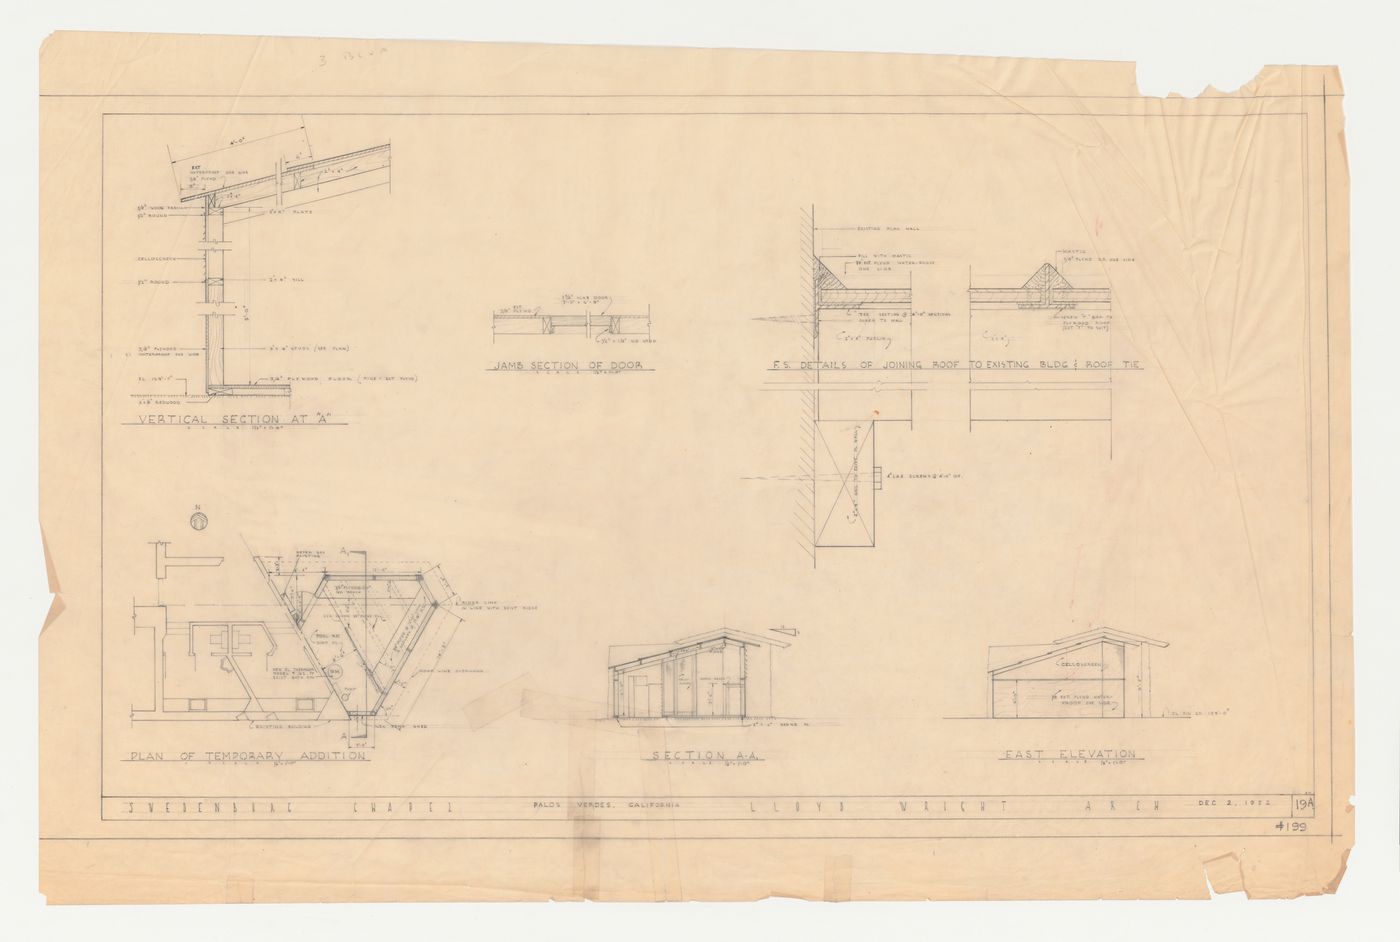 Wayfarers' Chapel, Palos Verdes, California: Plan, sections, elevation and details for a temporary addition to the chapel